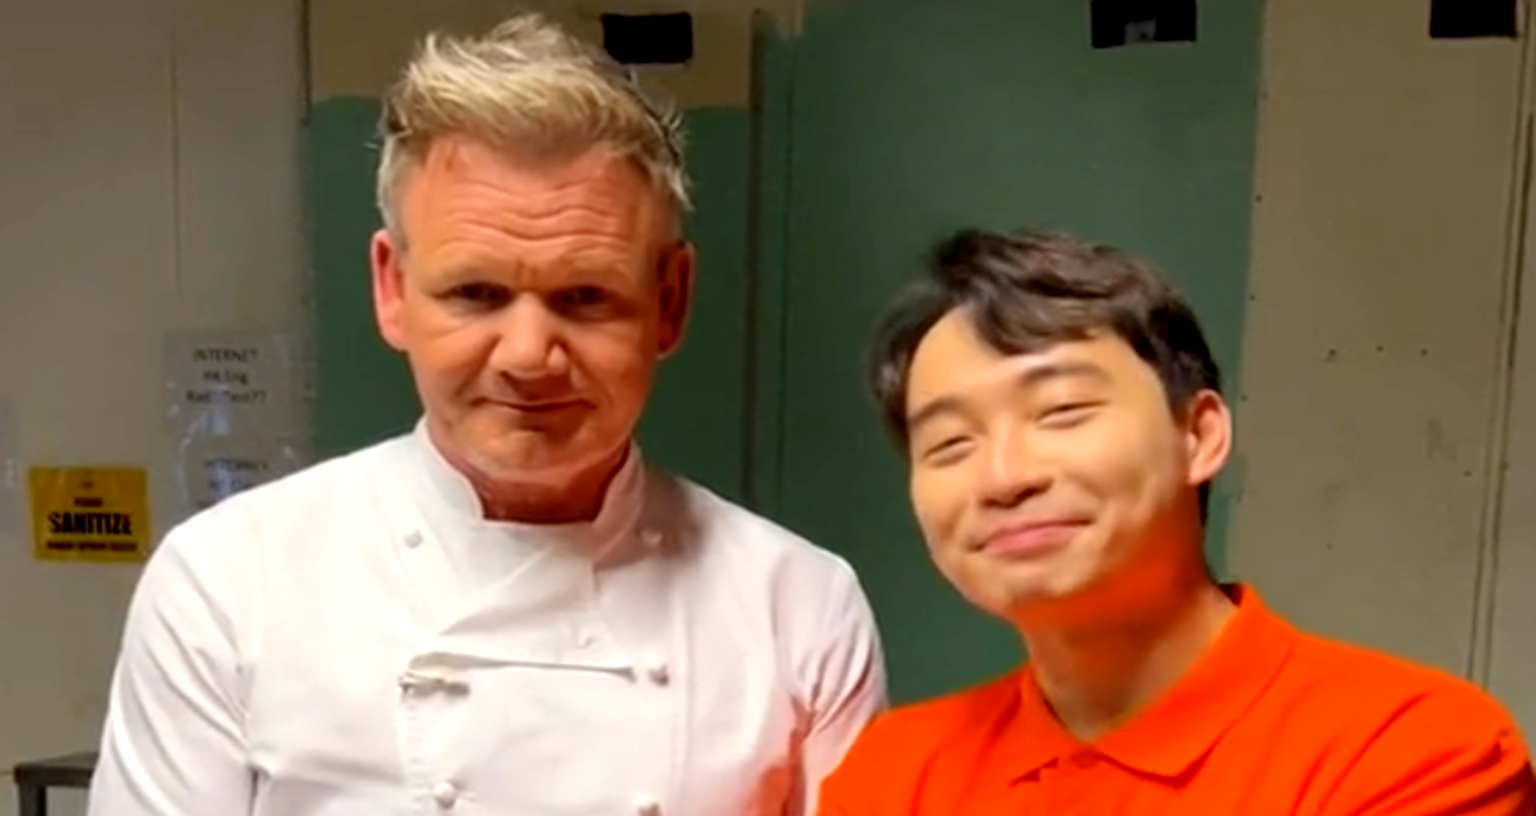 ‘We b*tched about Jamie Oliver for 15 minutes’: Uncle Roger meets Gordon Ramsey in new video